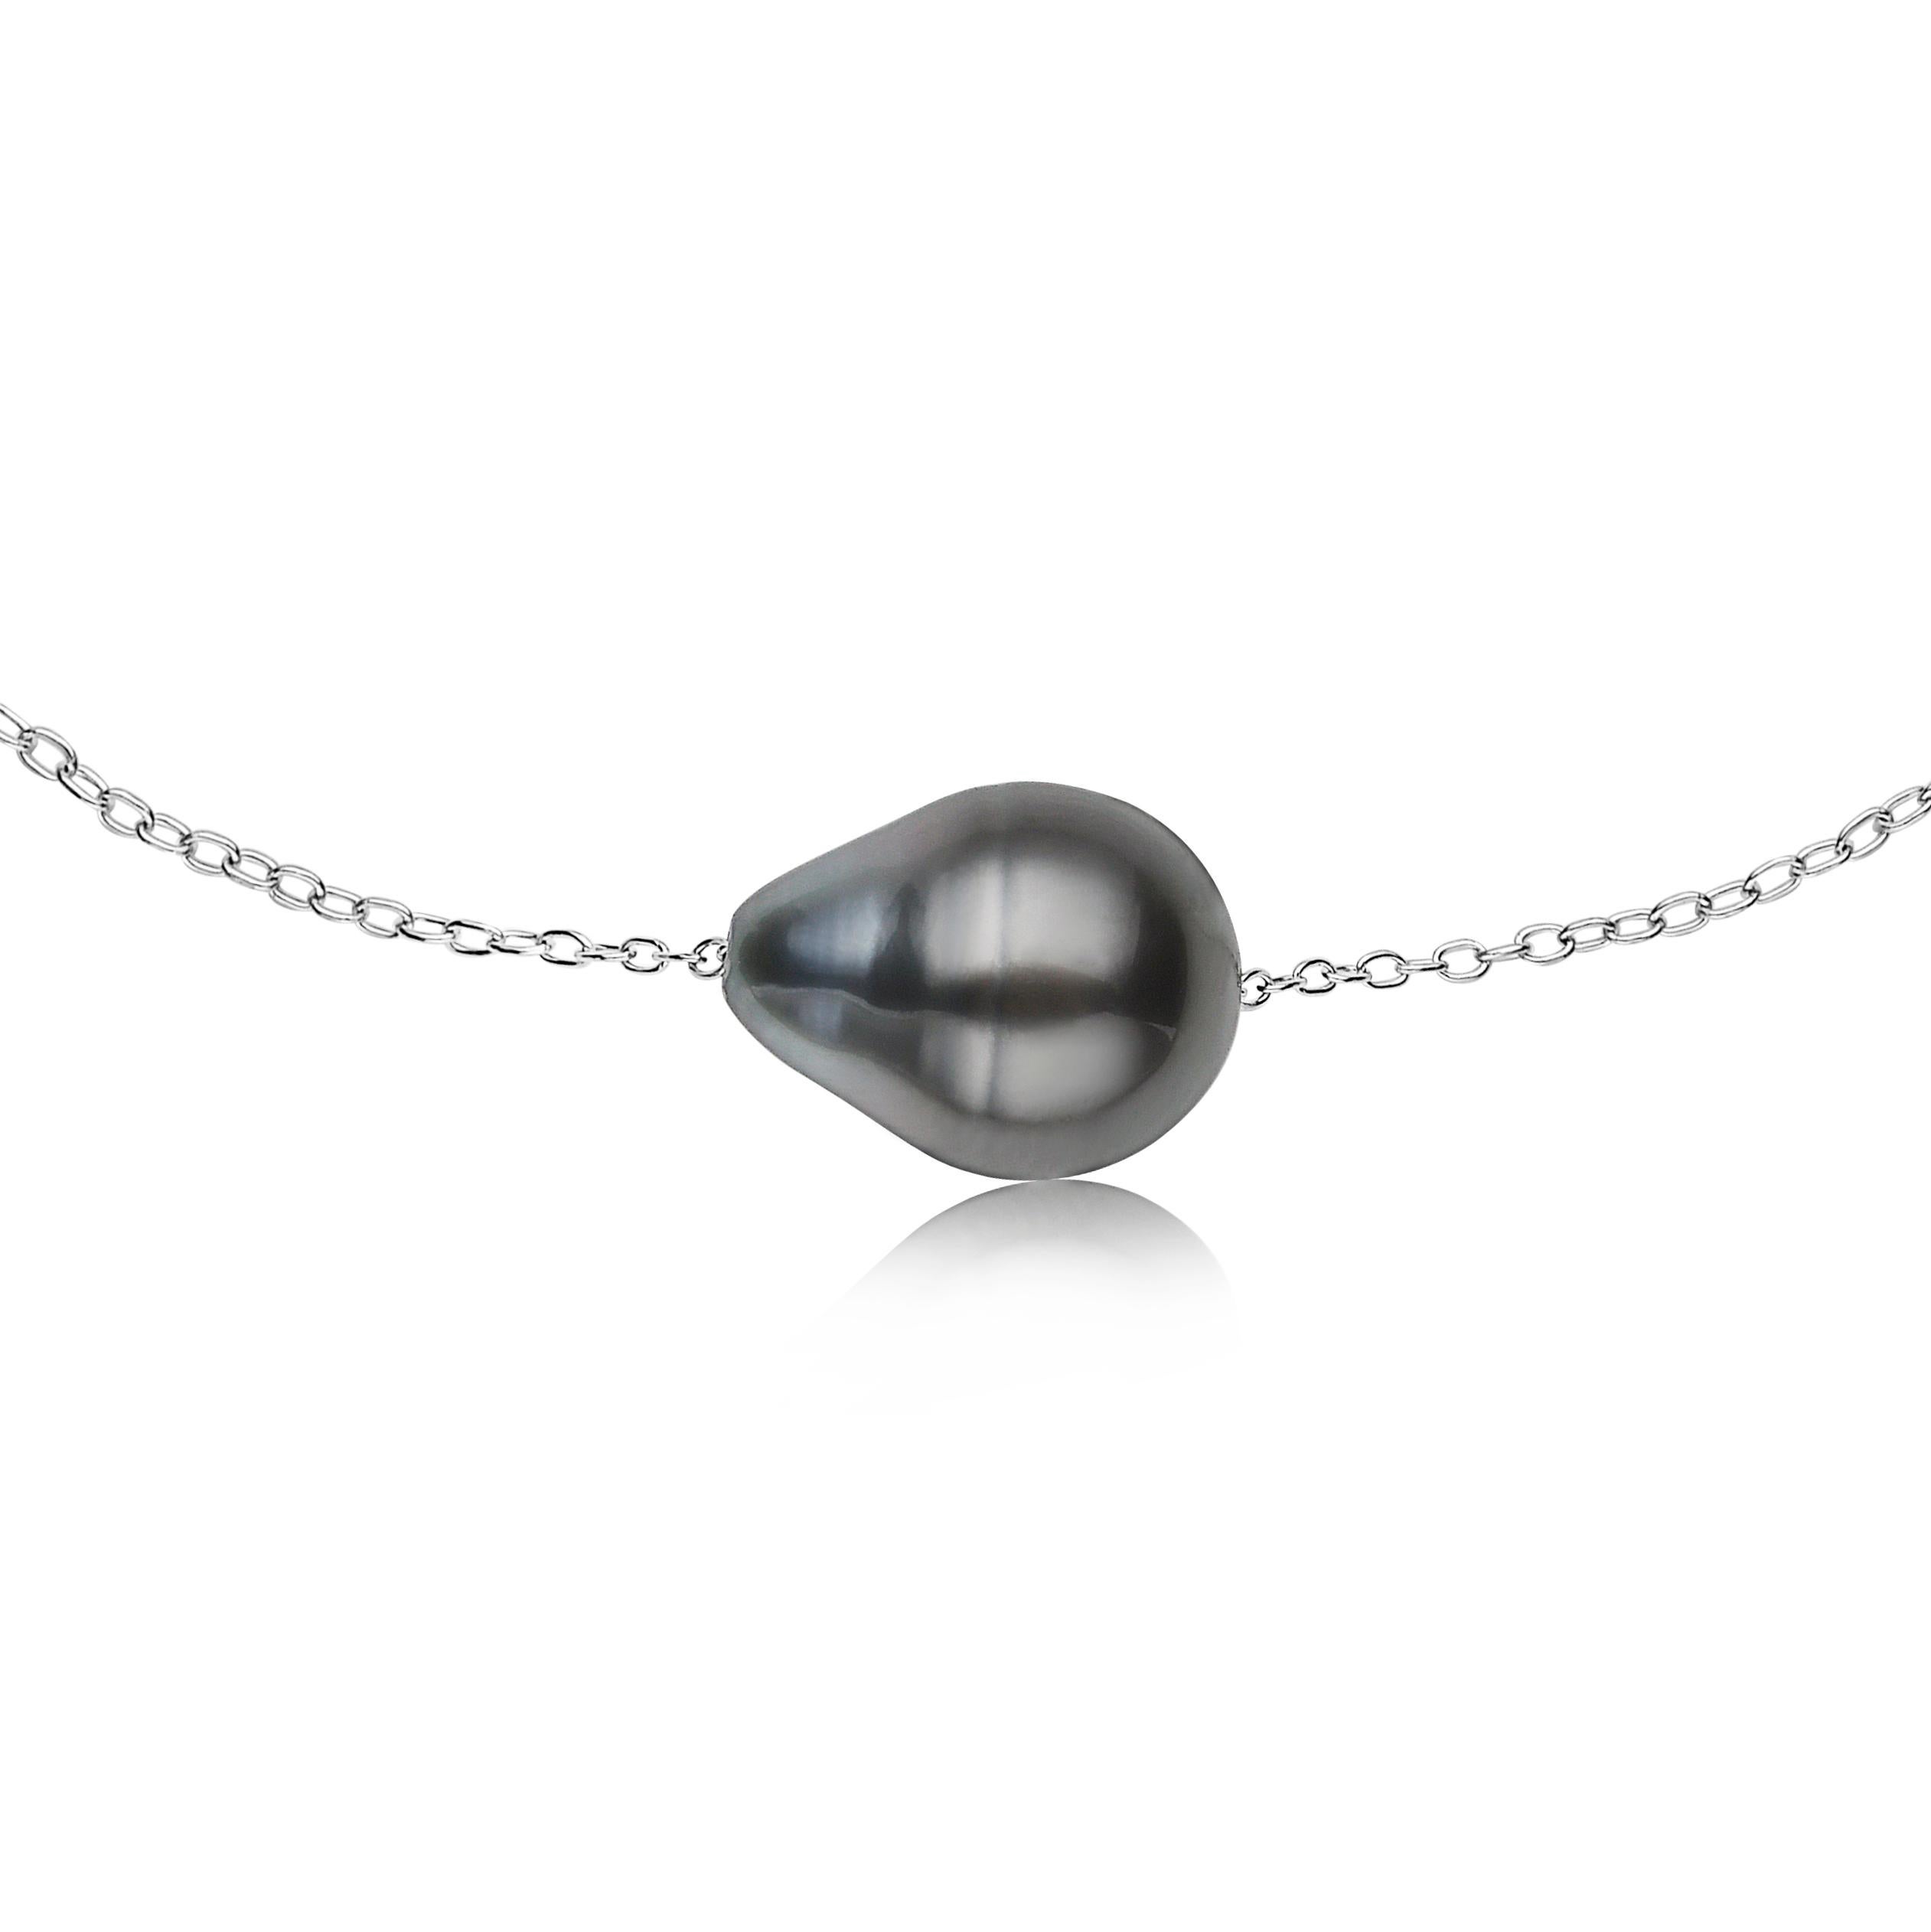 Contemporary South Sea Tahitian Baroque Pearl and Sterling Silver Adjustable Bracelet